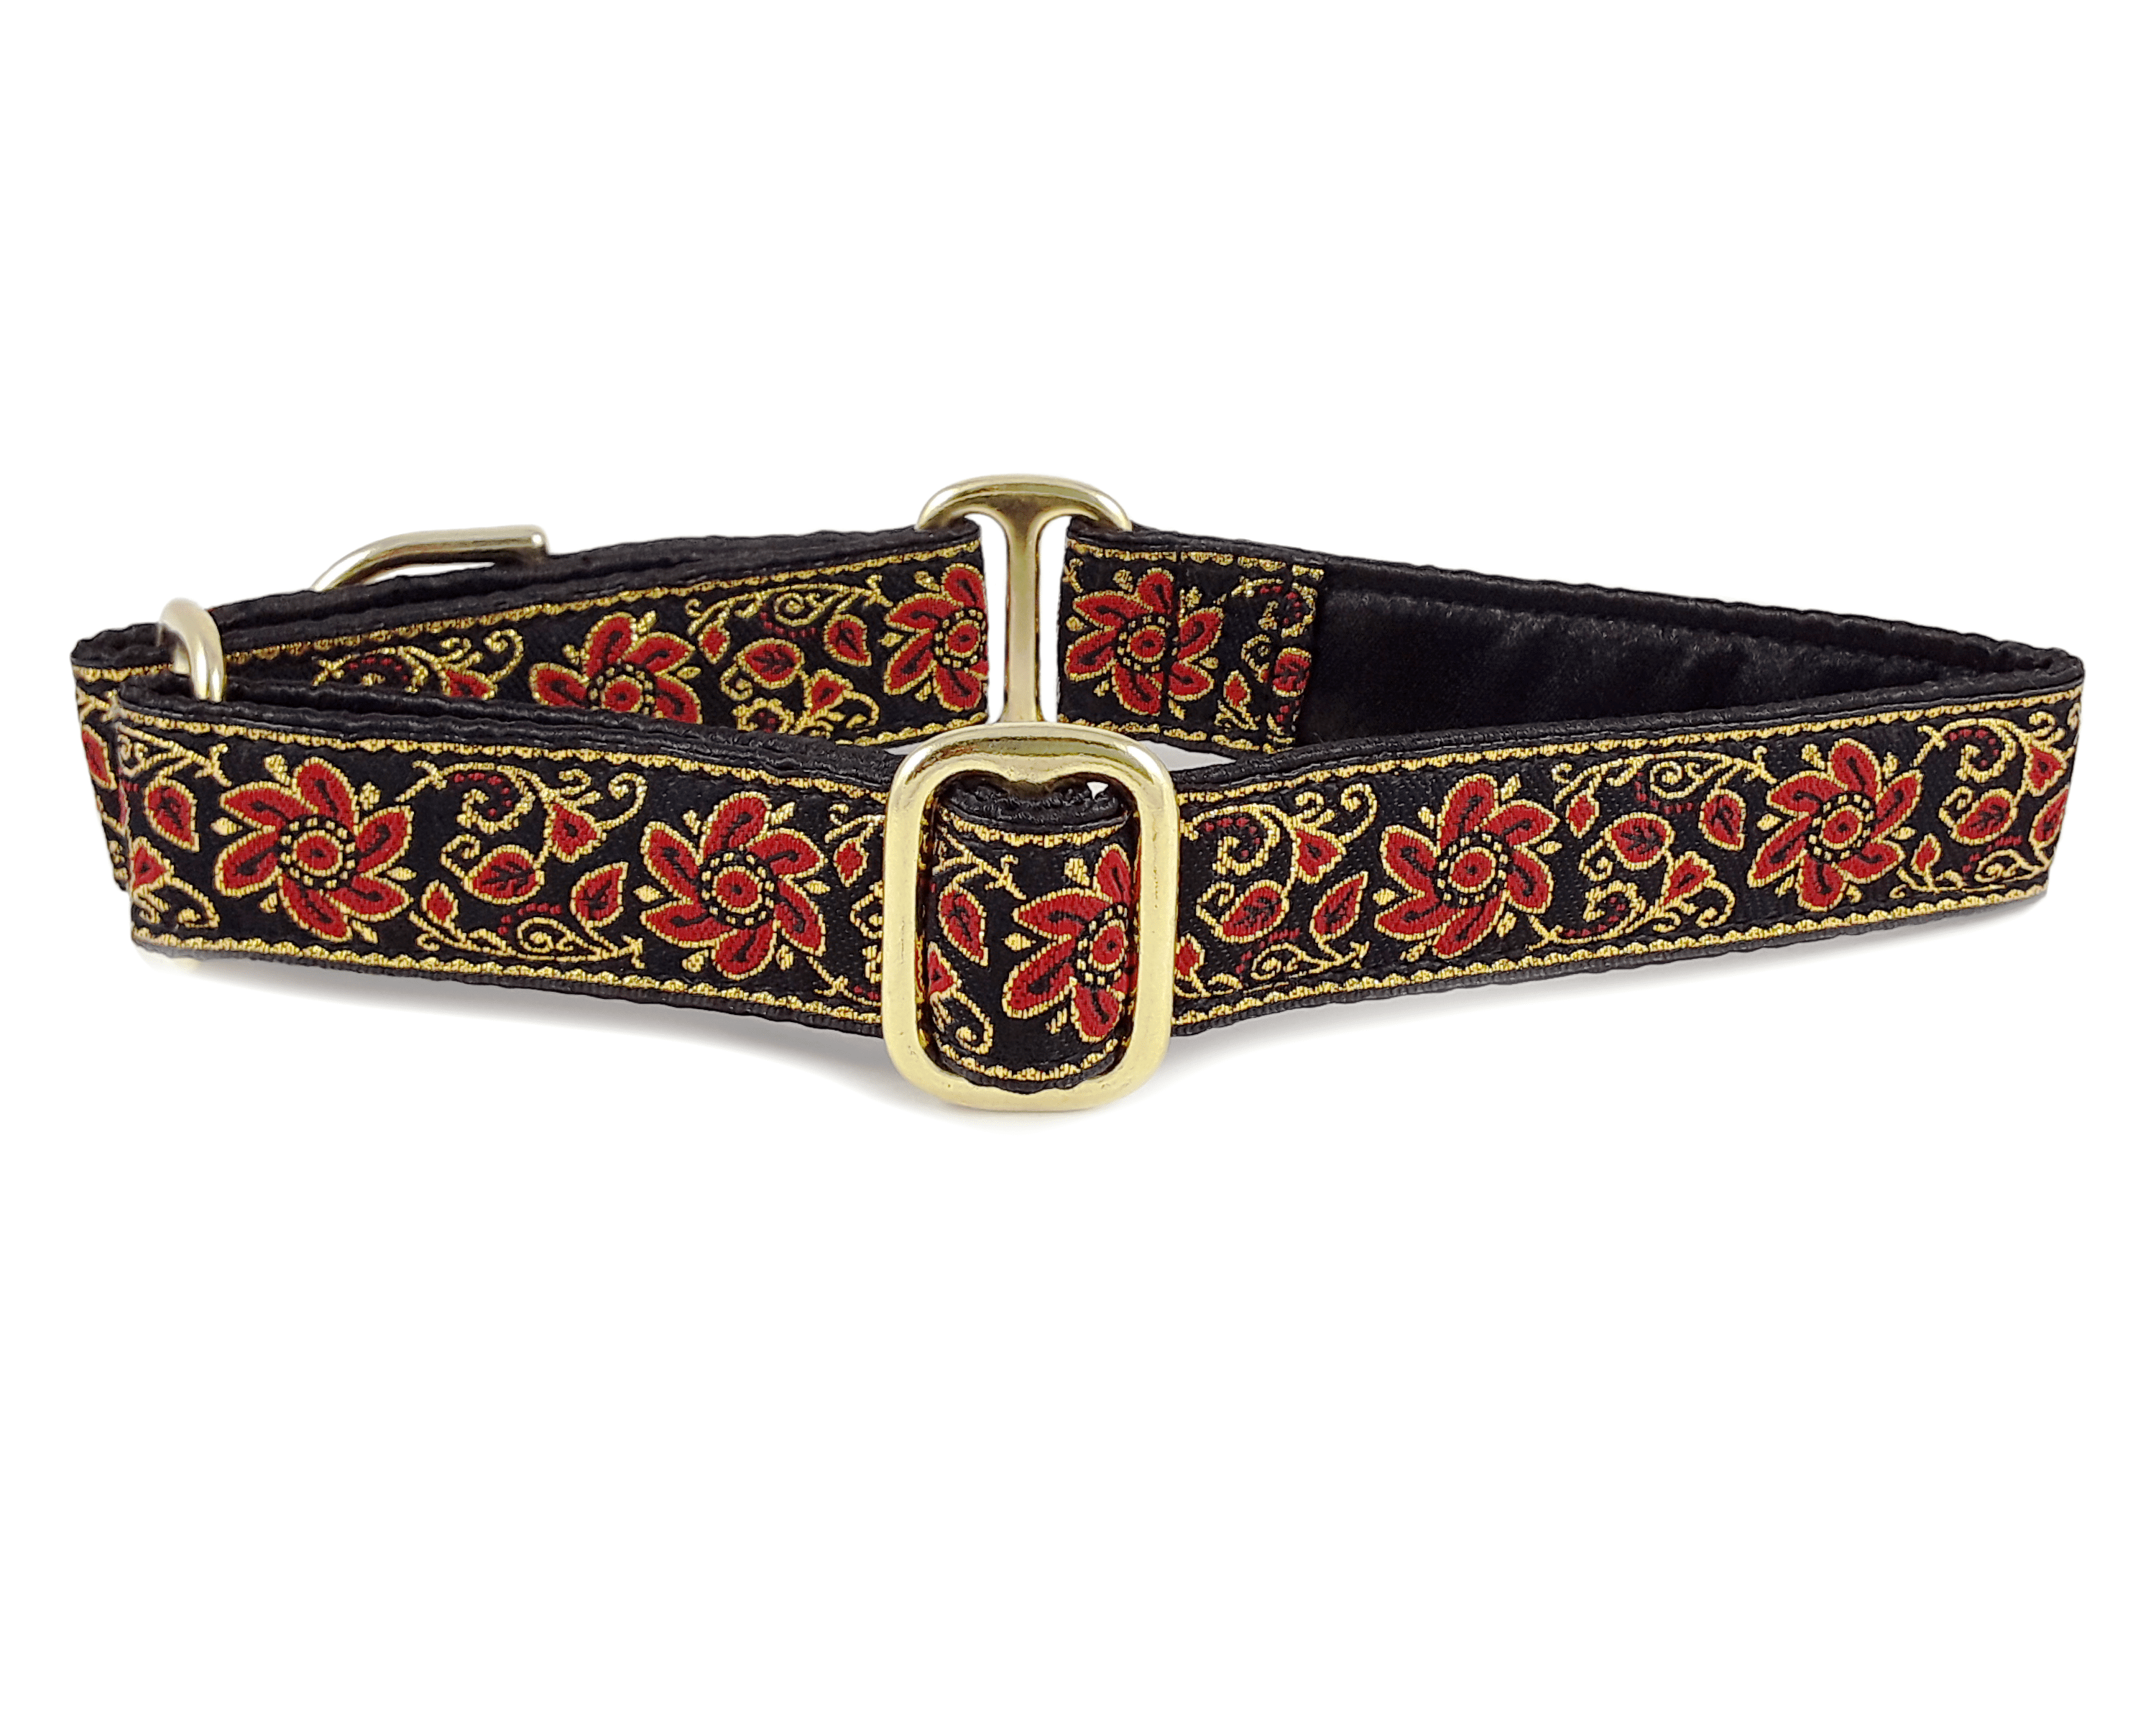 Sevilla Jacquard in Red, Black & Gold - Martingale Dog Collar or Buckle Dog Collar - 1" Width - The Hound Haberdashery